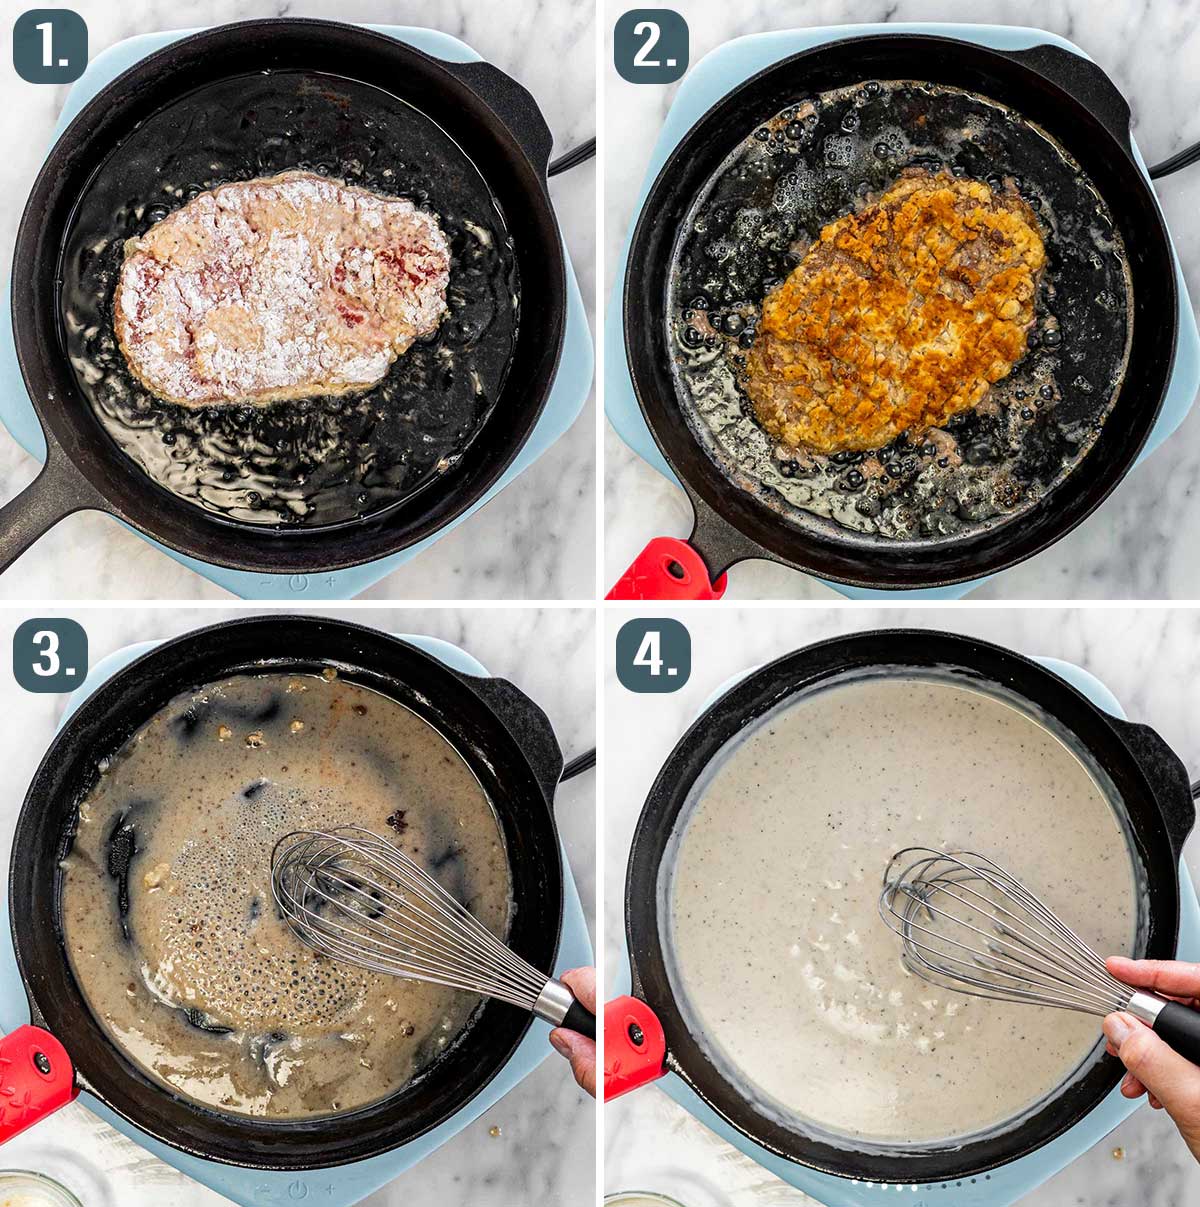 process shots showing how to fry chicken fried steak and make gravy